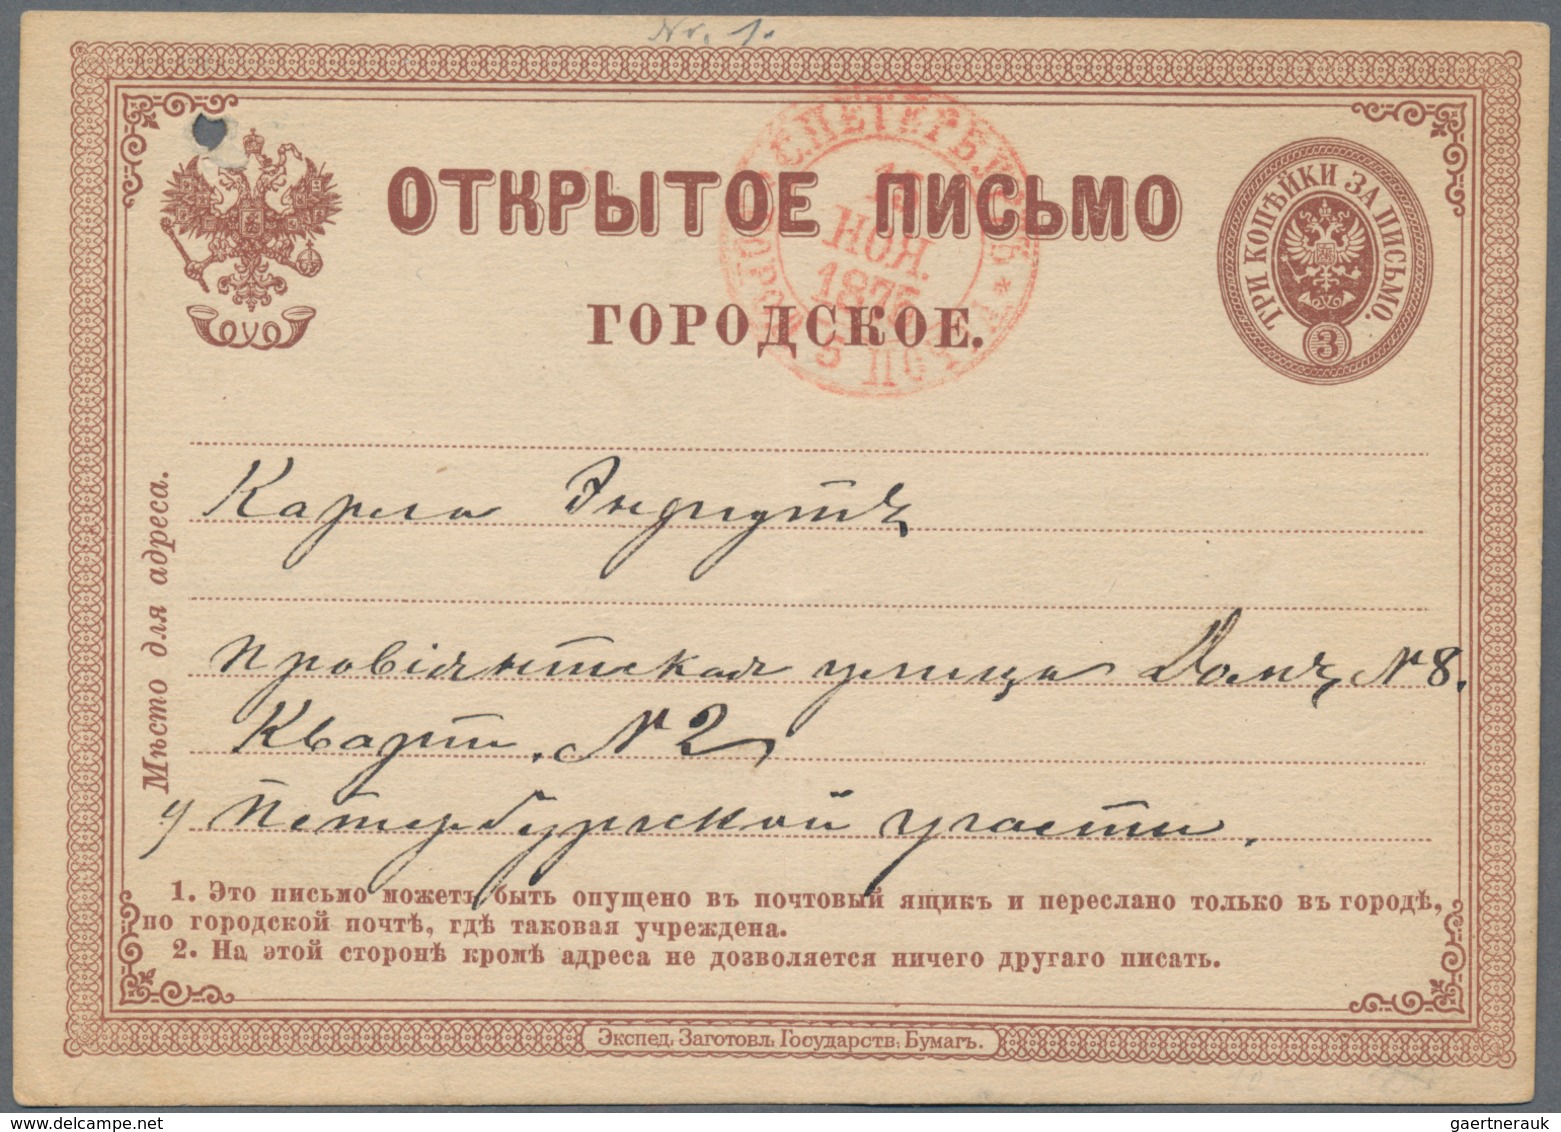 Russland / Sowjetunion / GUS / Nachfolgestaaaten: 1875/2000, 65 Cards And Letters Containing Early R - Sammlungen